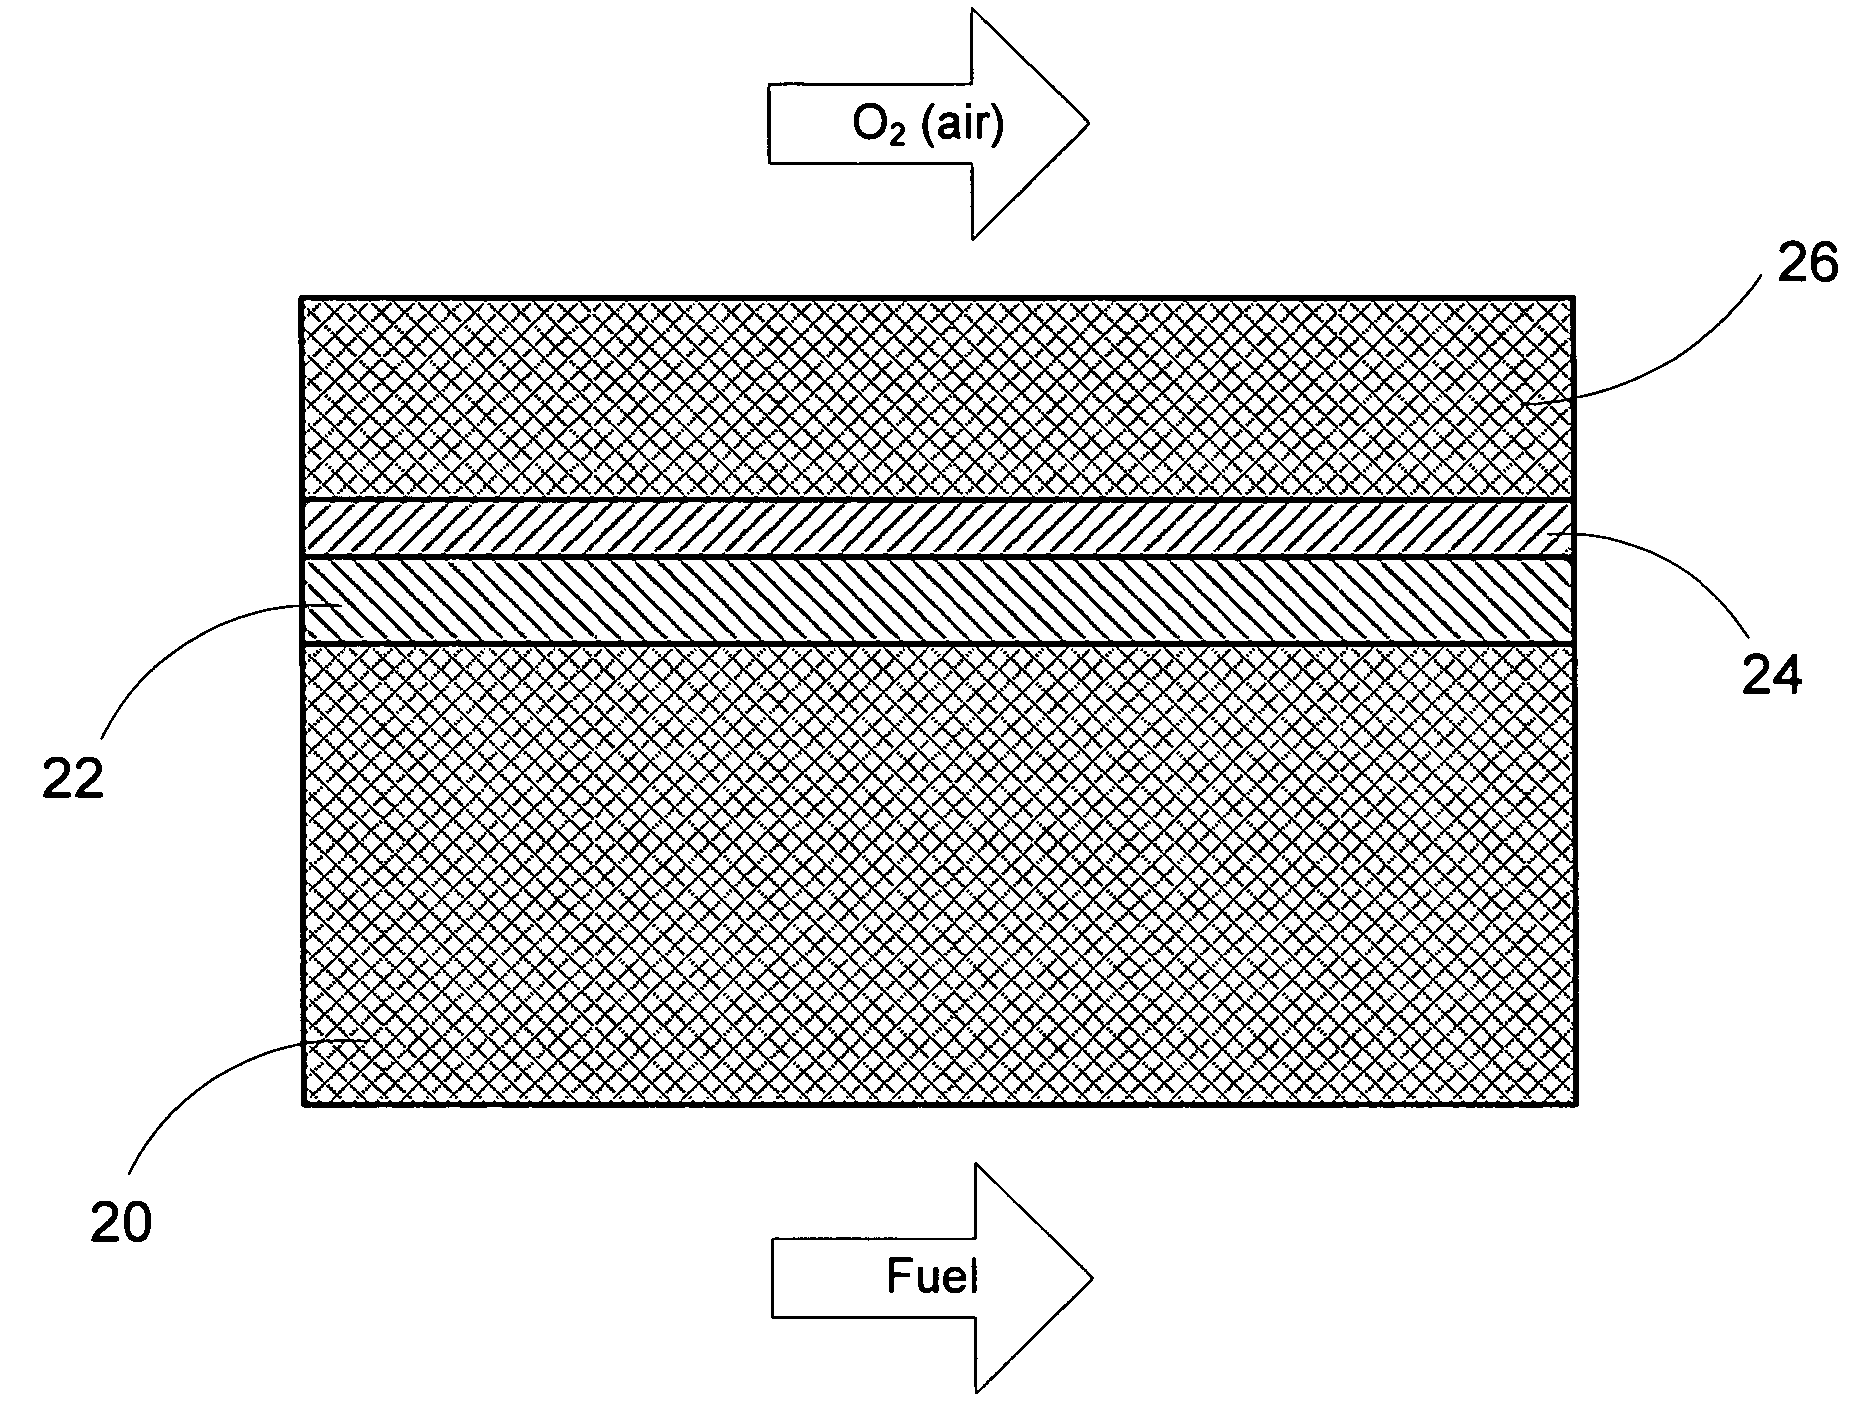 Anode-supported solid oxide fuel cells using a cermet electrolyte